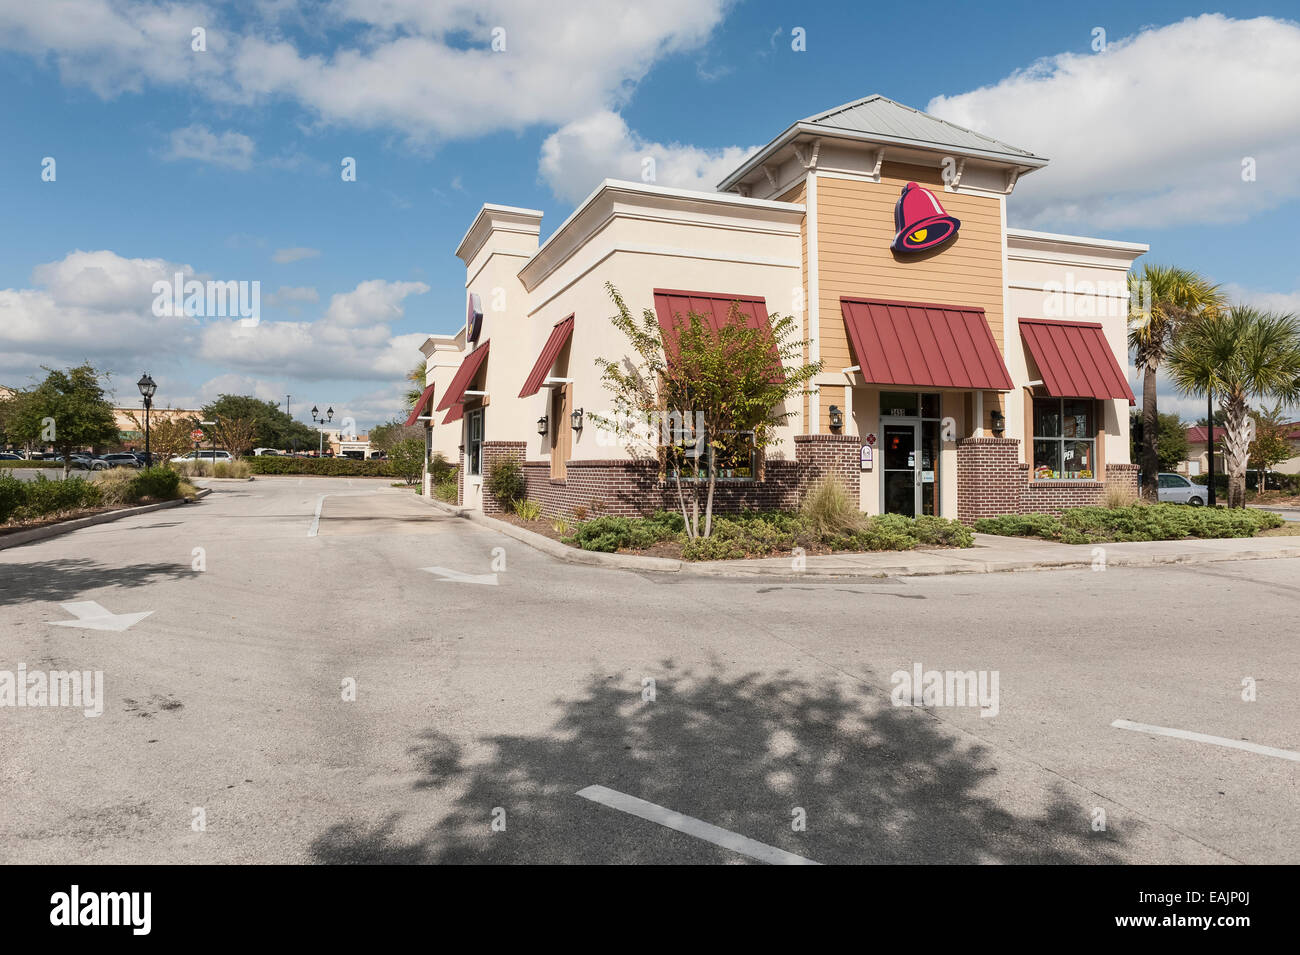 Taco Bell Restaurant Storefront Building located in The Villages central Florida USA Stock Photo